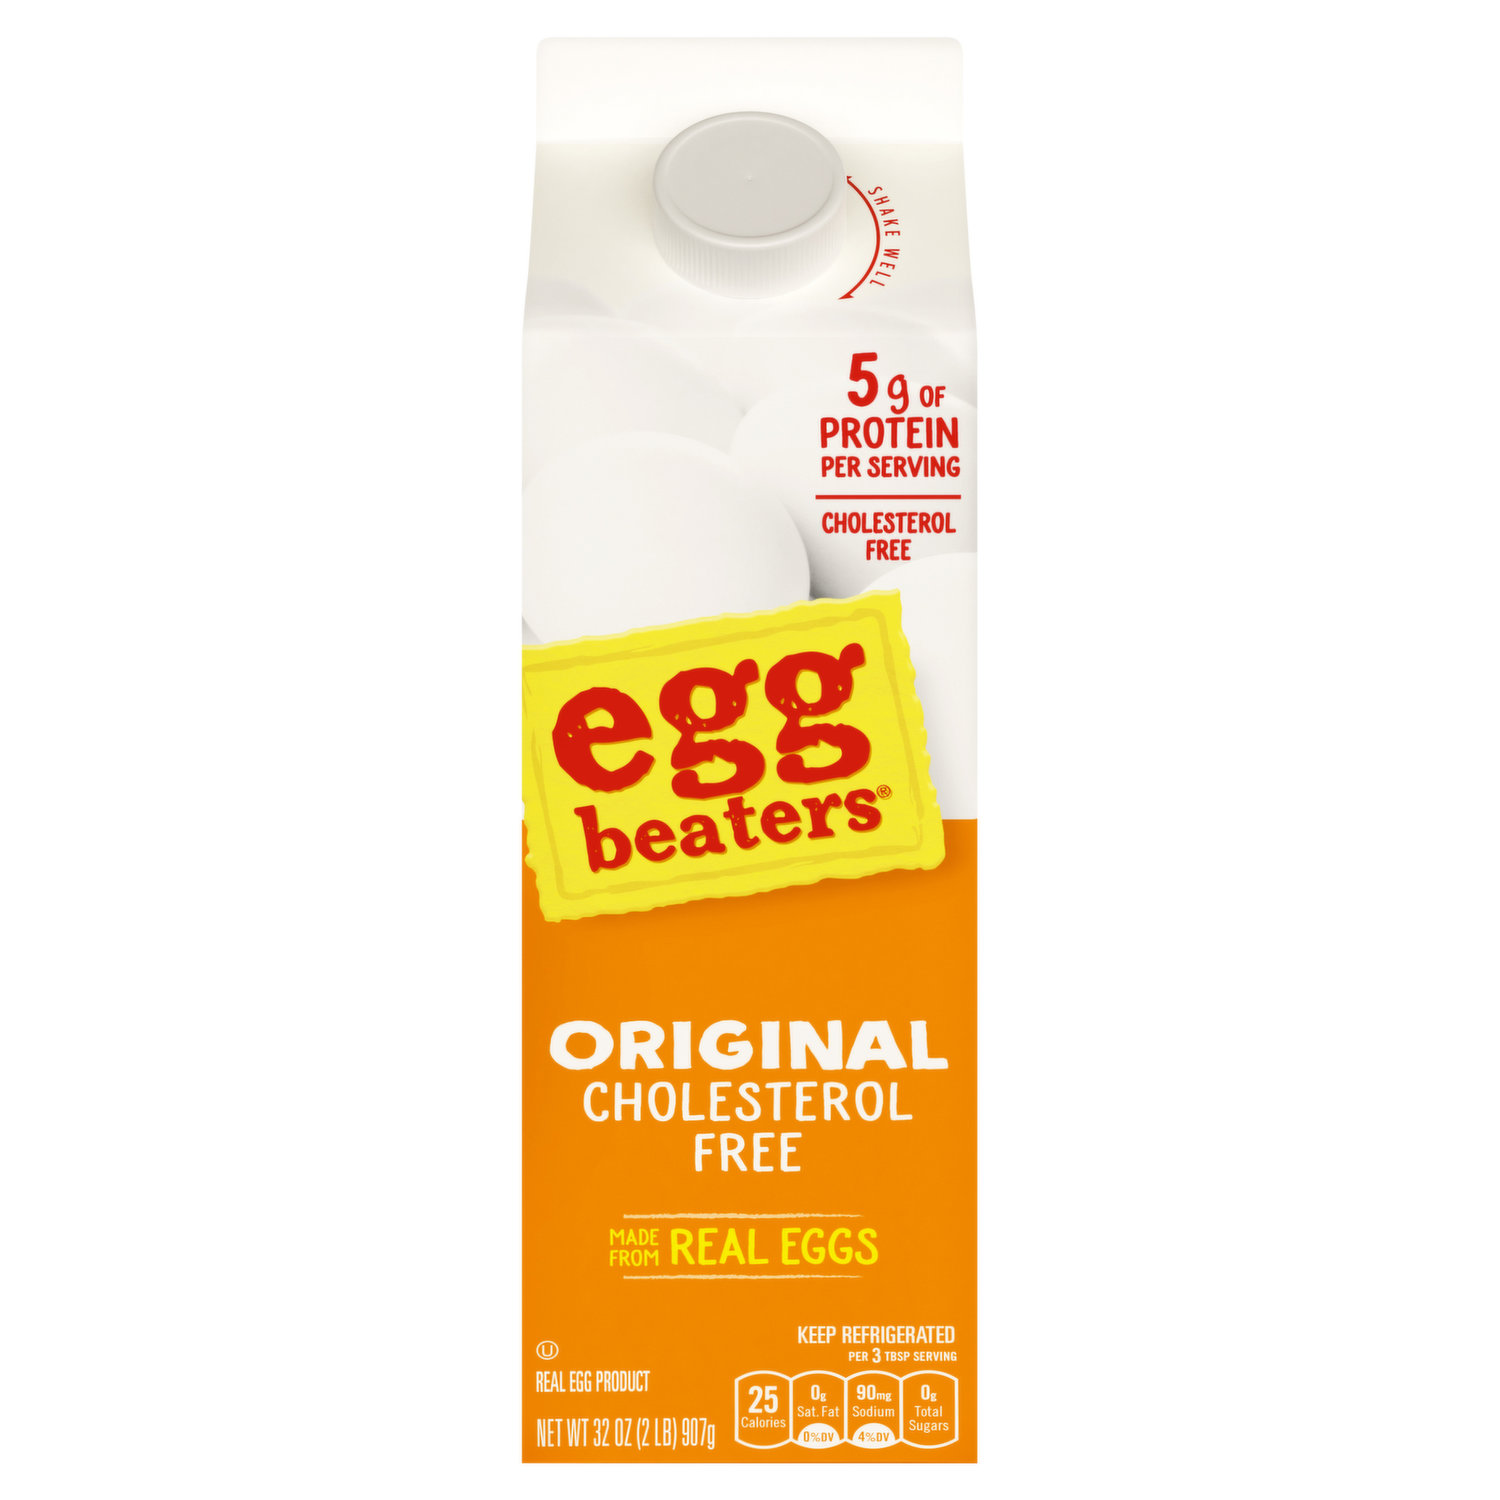 Great Value Cage-Free Hard Boiled Eggs, 9.31 oz, 6 Count